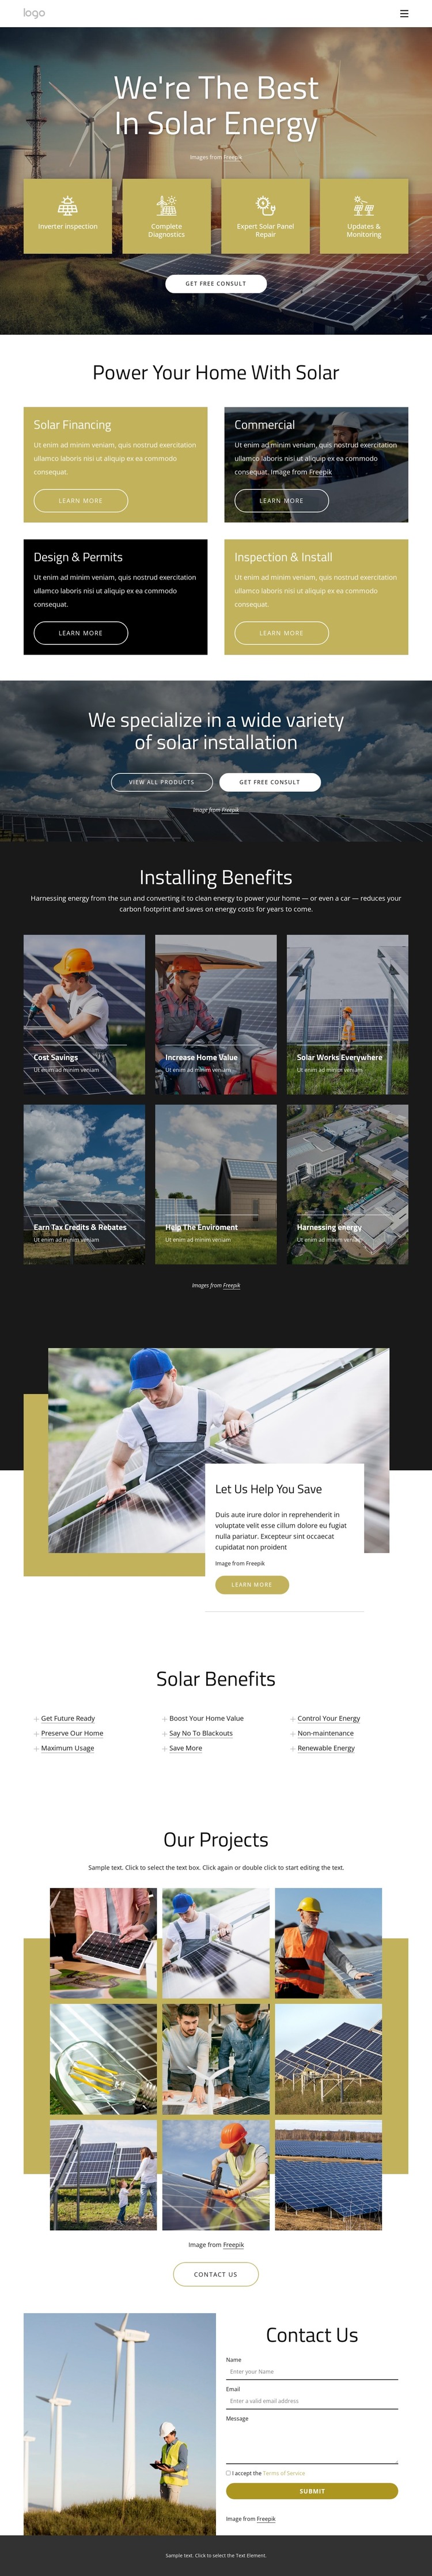 We are the best in solar energy WordPress Theme